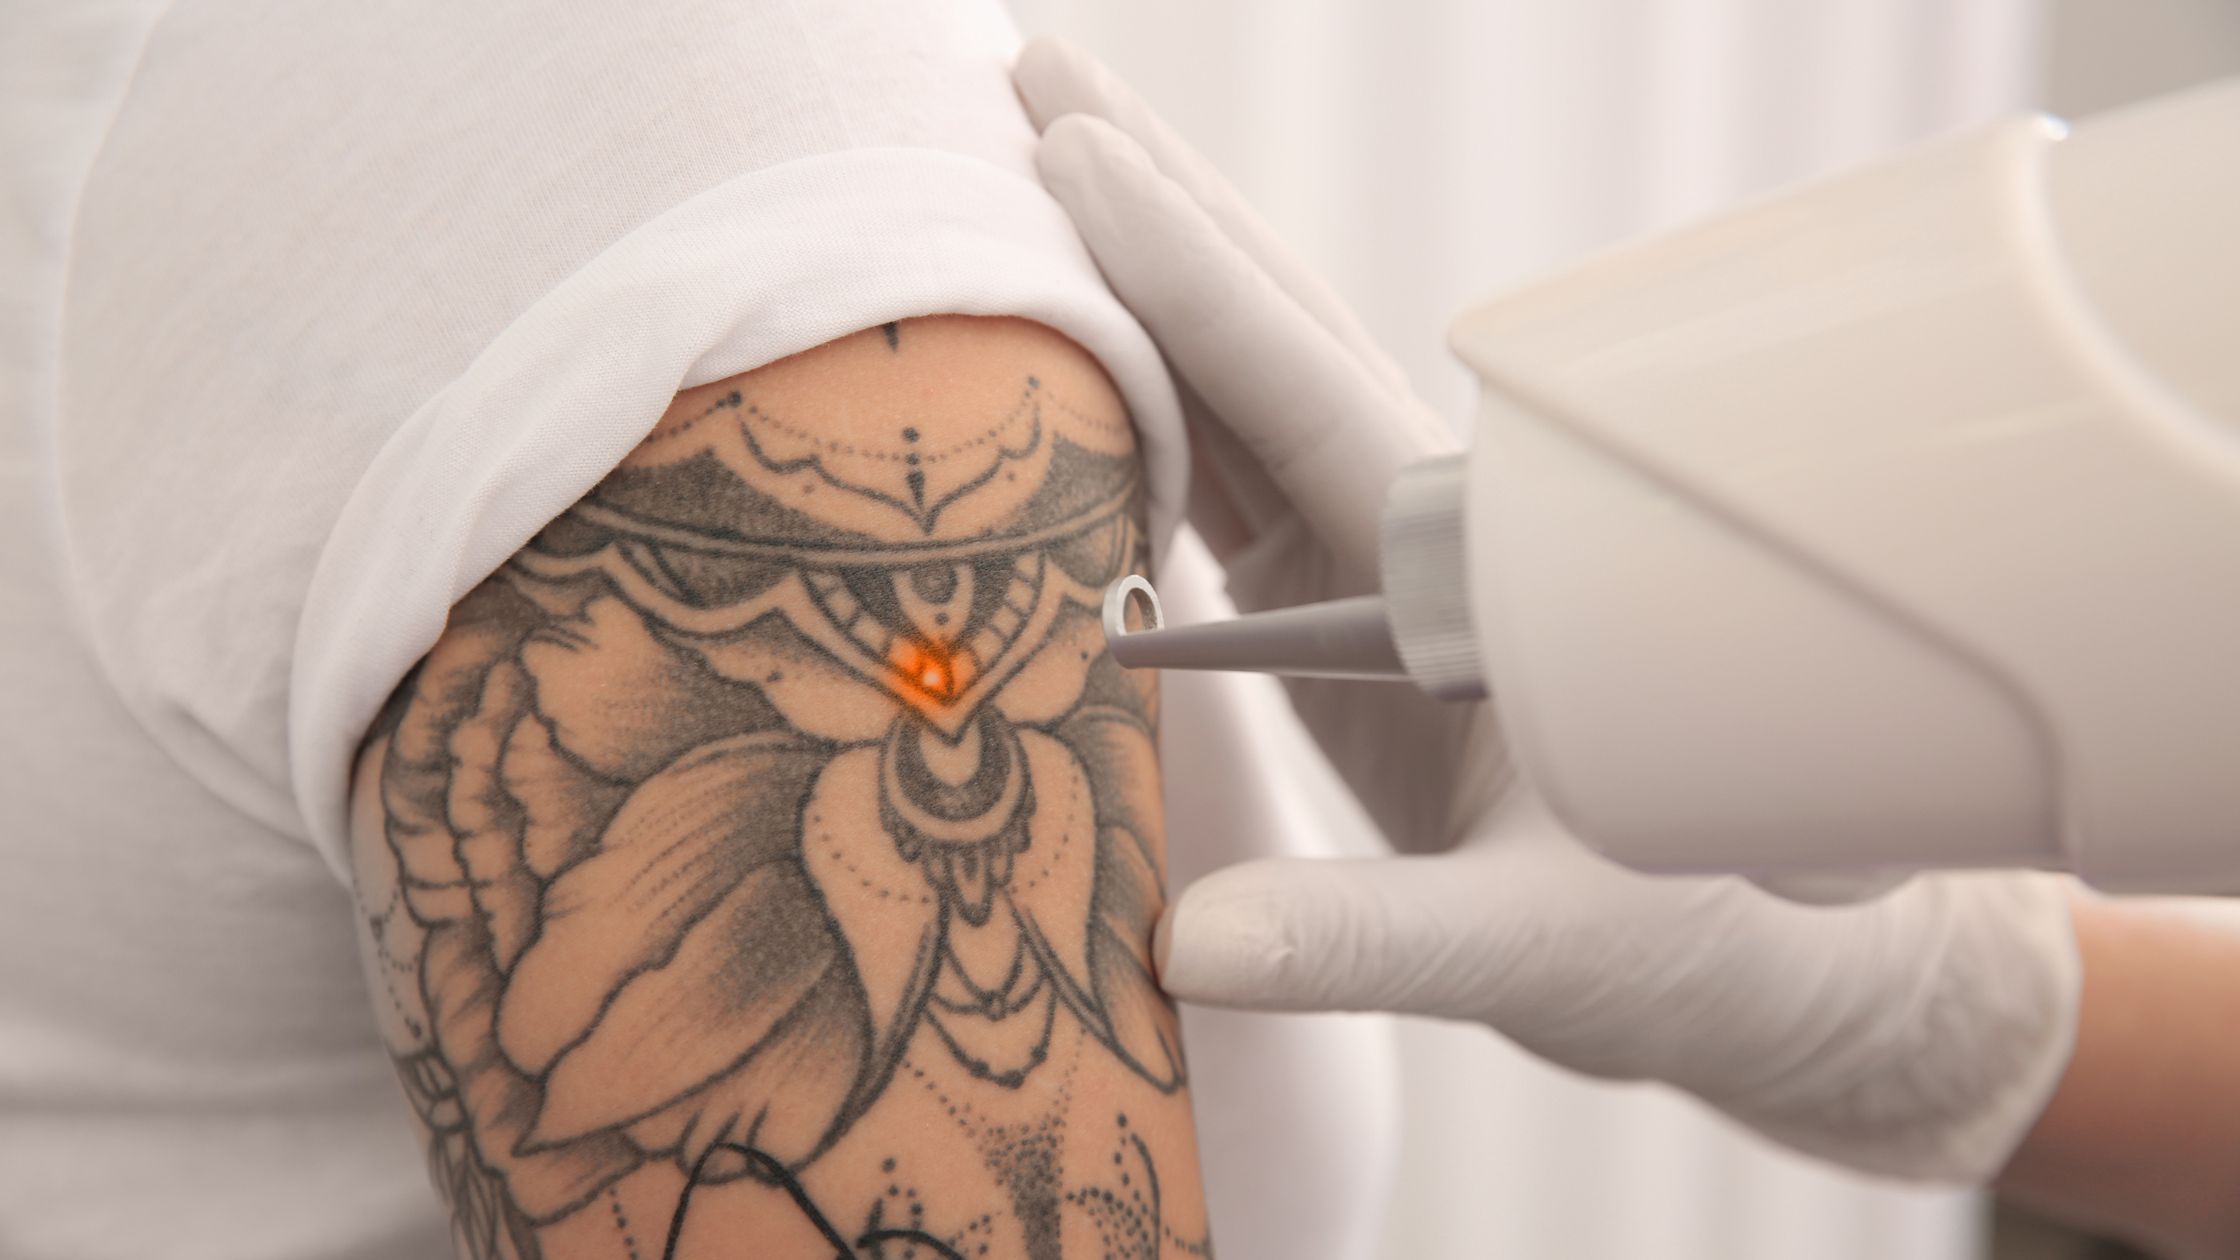 Getting A Tattoo? Consider These Things Before You Do. - ScoopWhoop